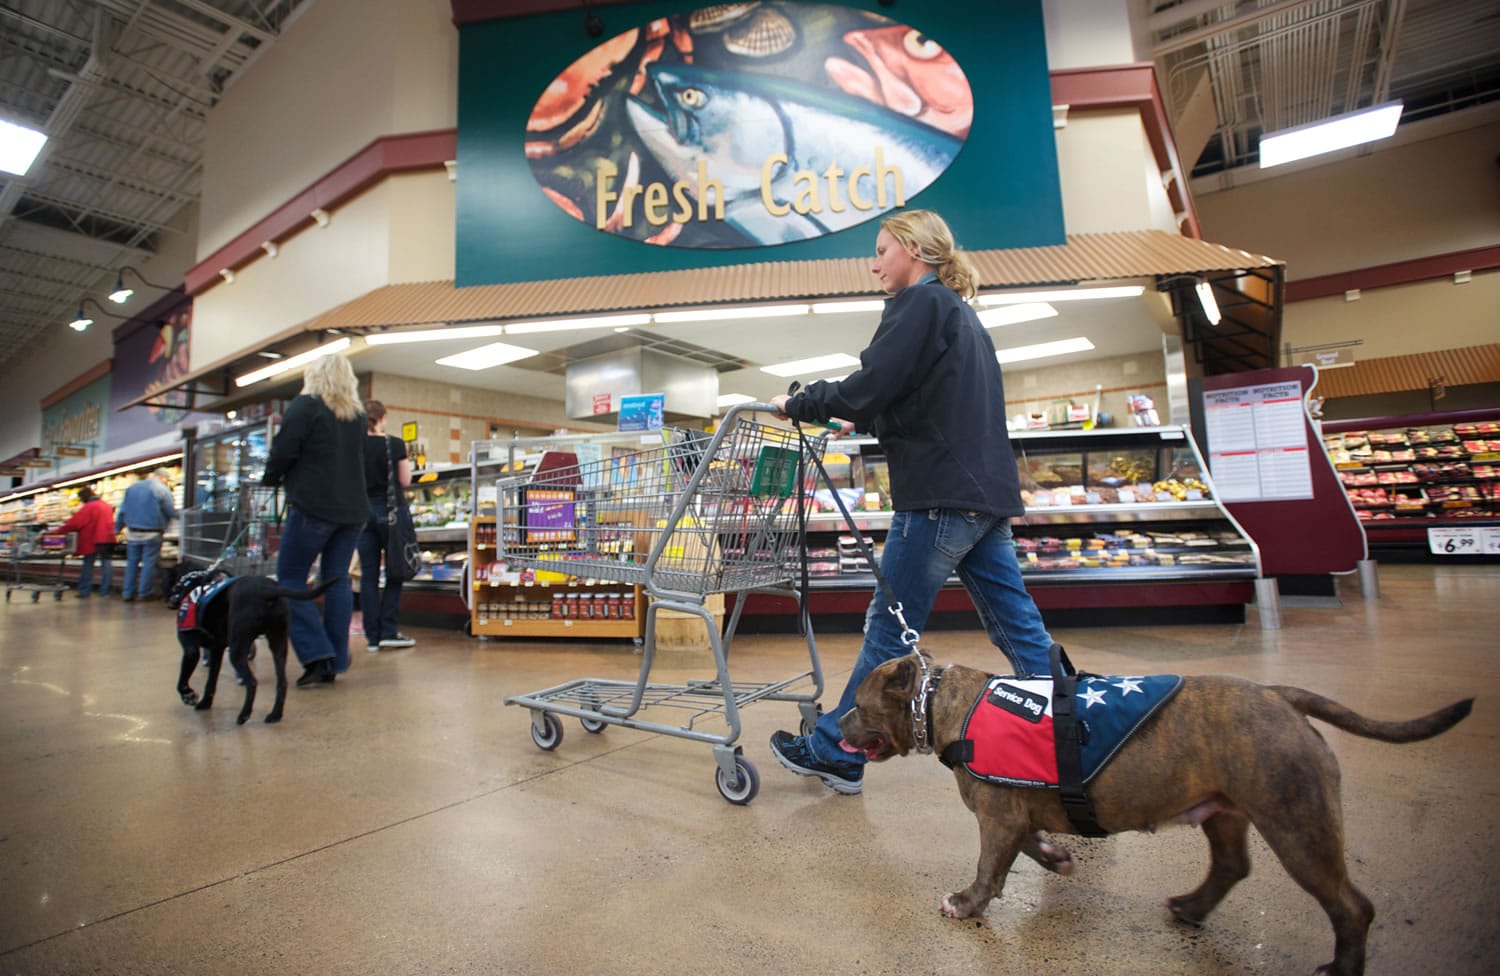 Shannon Walker, left, and Ora Evans, right, walk Oso and Diamond, respectively, through the Battle Ground Fred Meyer on Wednesday as part of their therapy dog training.